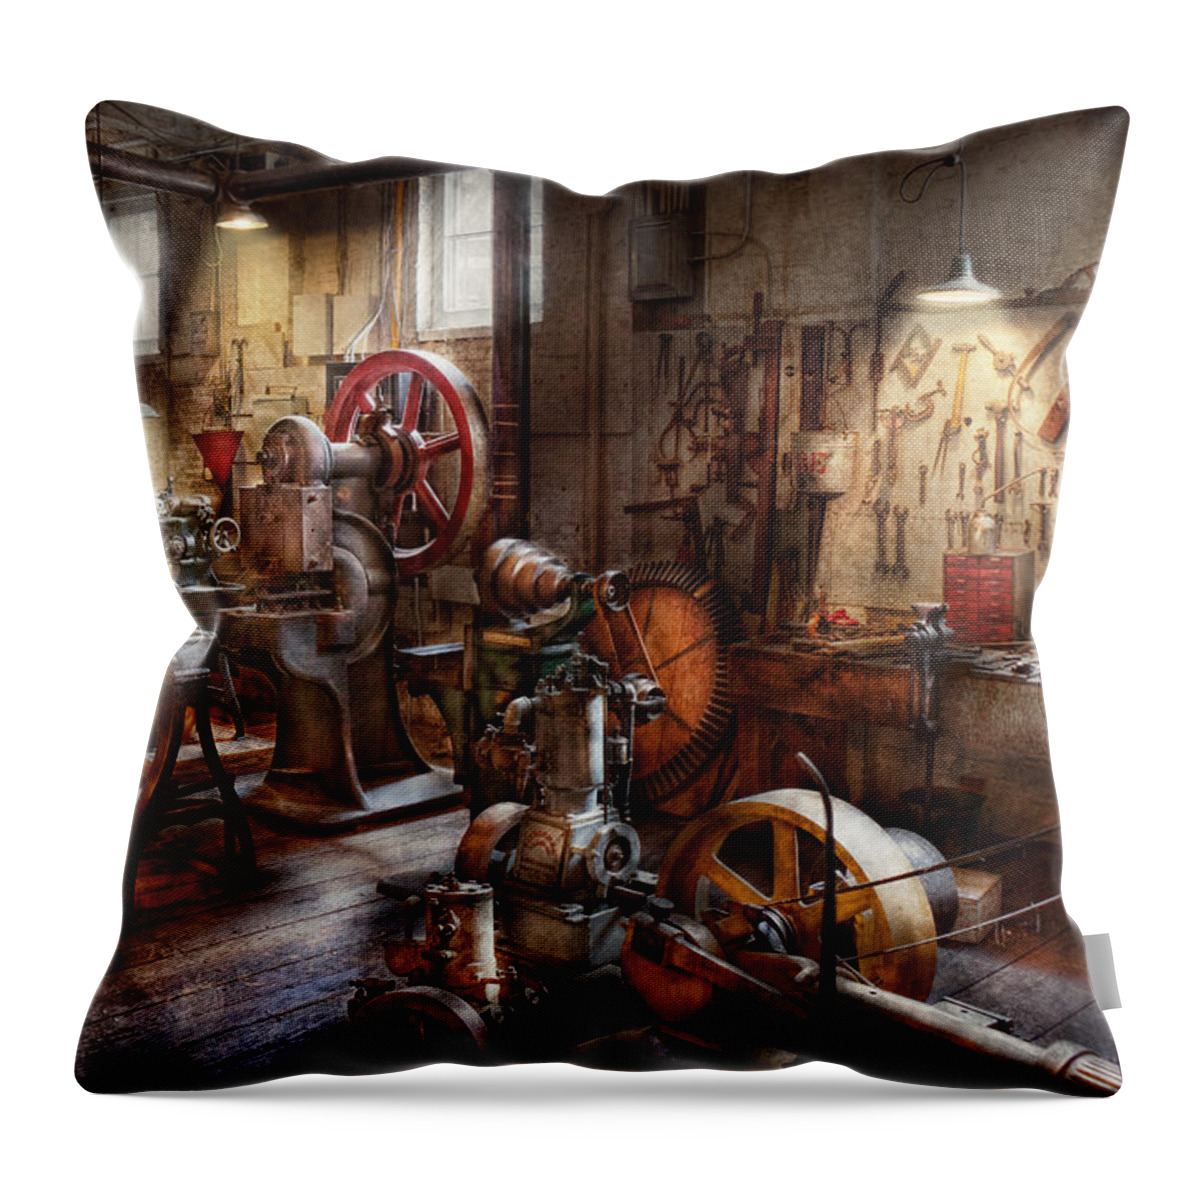 Machinist Throw Pillow featuring the photograph Machinist - A room full of memories by Mike Savad